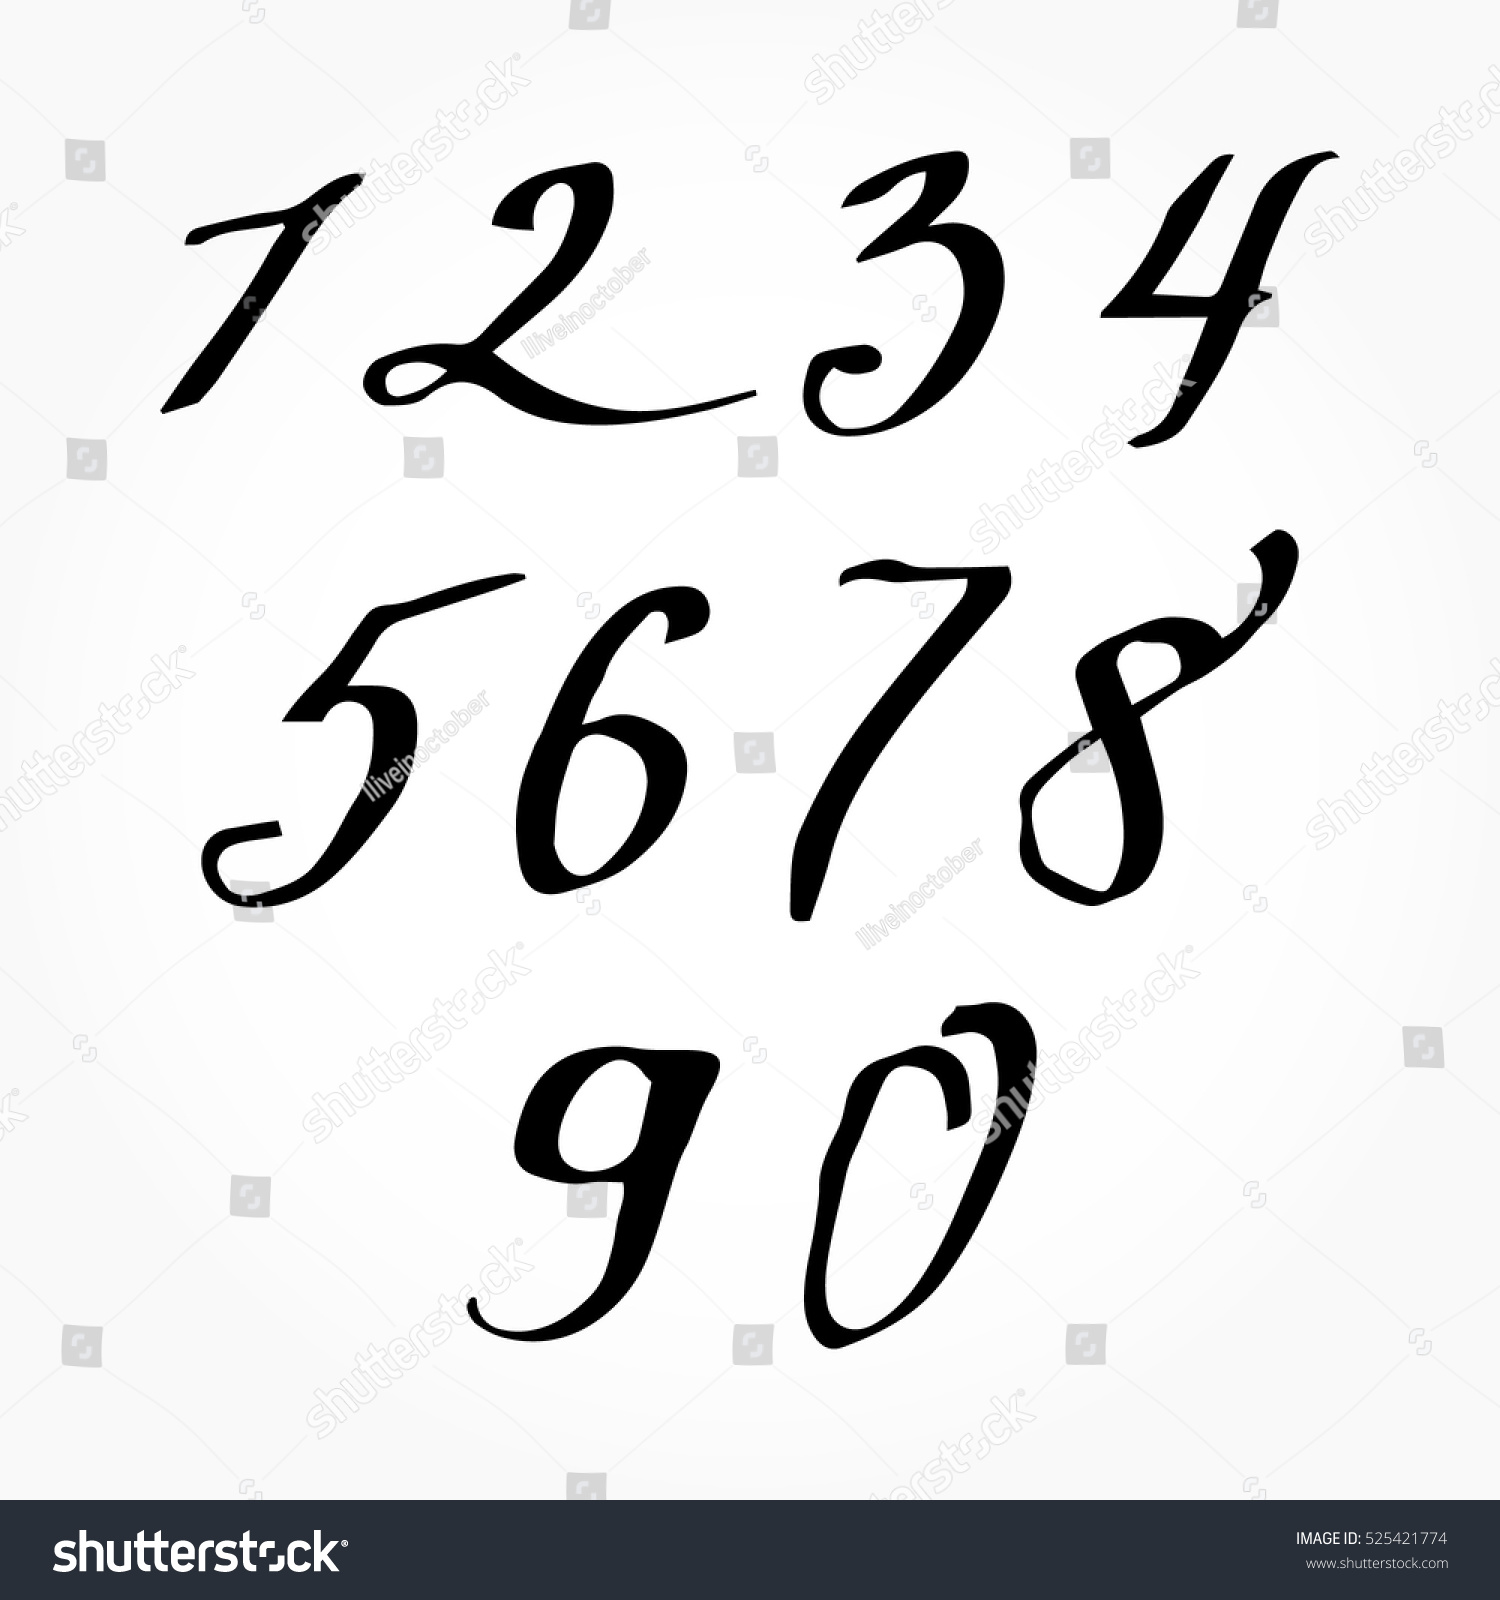 Hand Drawn Brushed Numbers Modern Calligraphy Stock Vector 525421774 ...